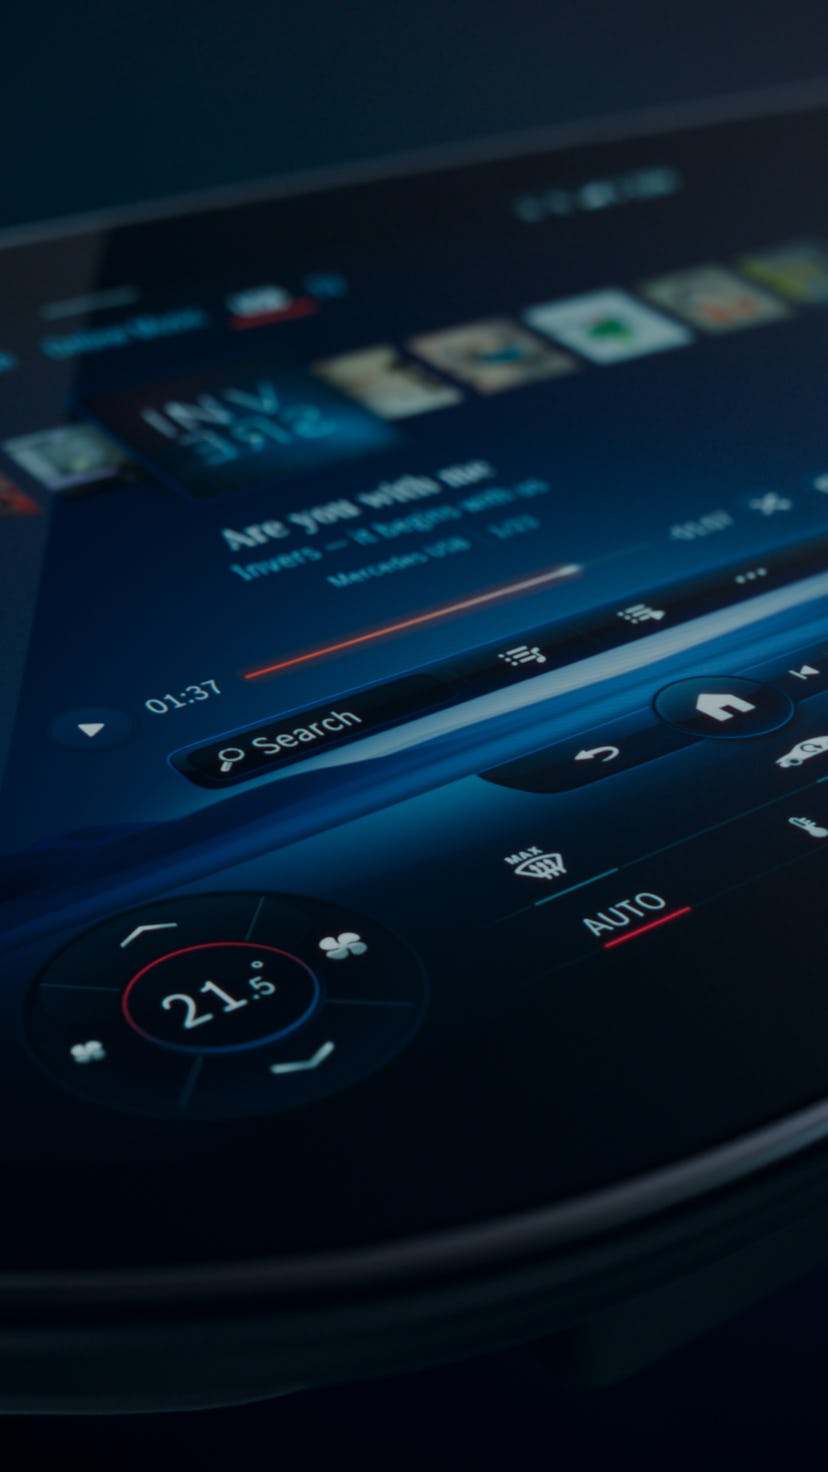 The Mercedes-Benz Hyperscreen, a 56-inch infotainment system that will debut in late 2021.